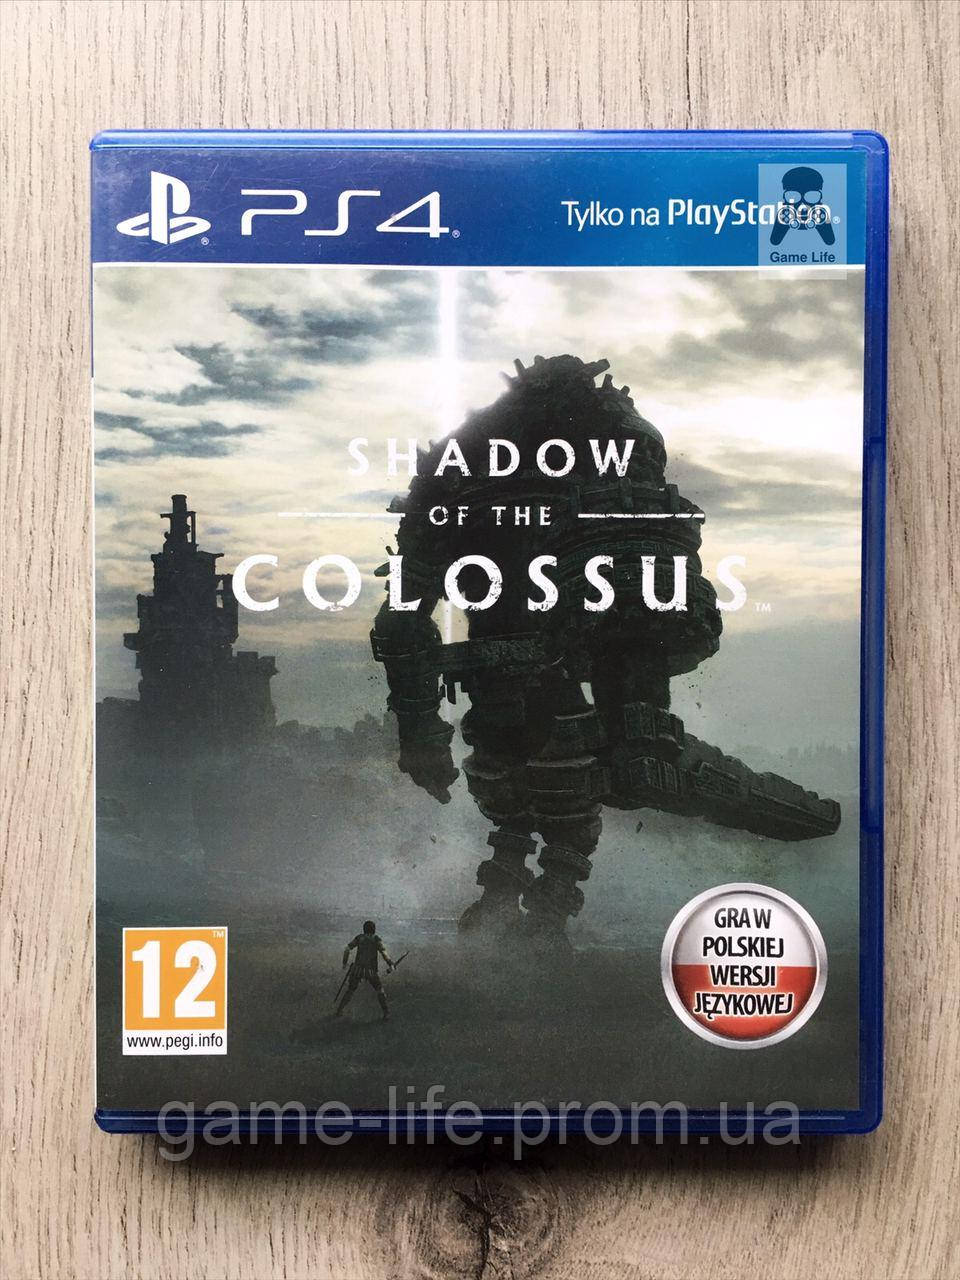 Shadow of the Colossus (росські субтитри) (б/у) PS4